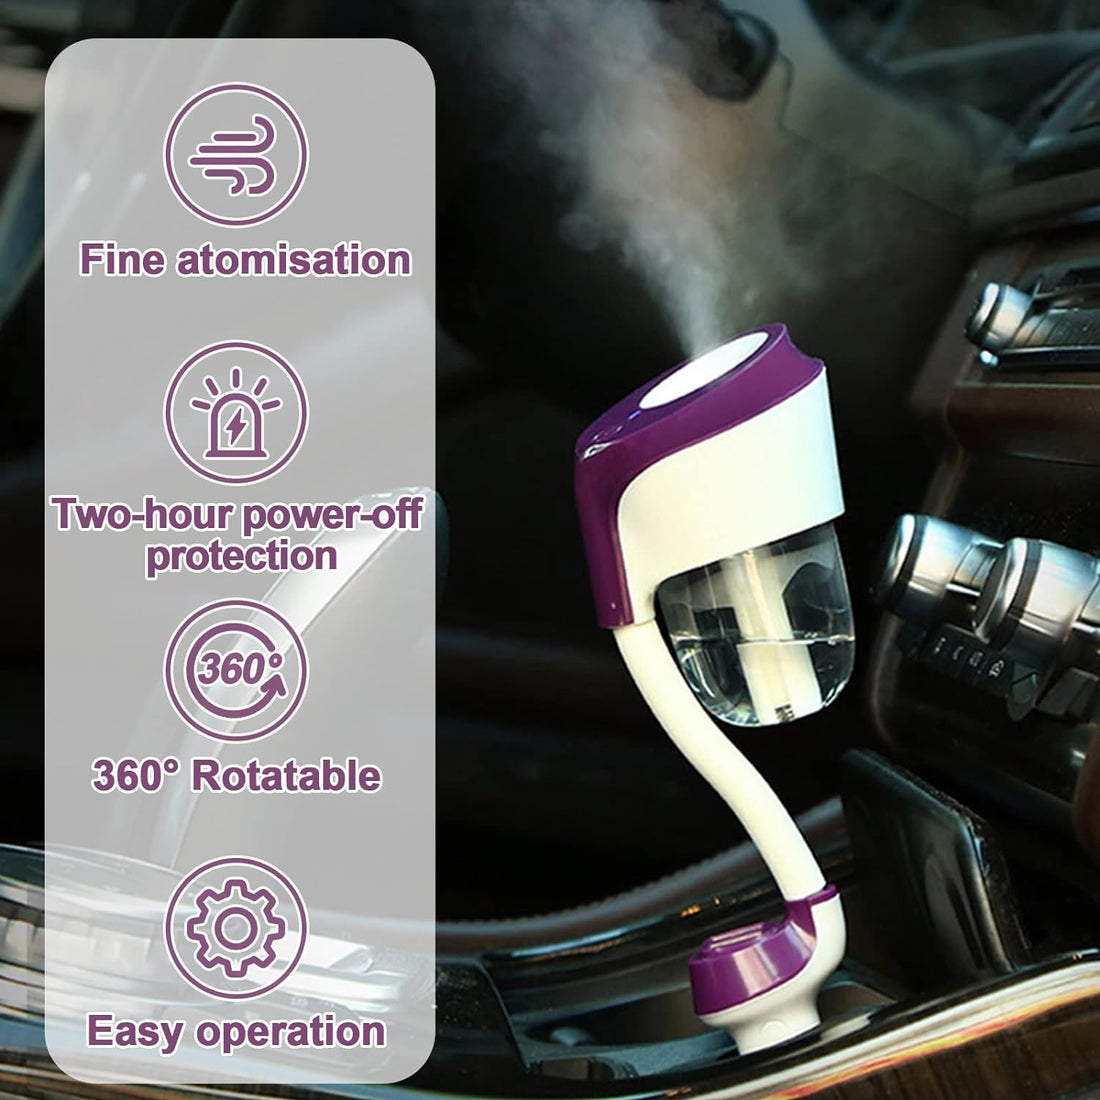 Car Humidifier, Car Diffuser, 50 ML Portable Ultrasonic Cool Atomization Humidifier with 2 USB Charger, 12V Mini Travel Aromatherapy Essential Oil Diffuser (Purple)